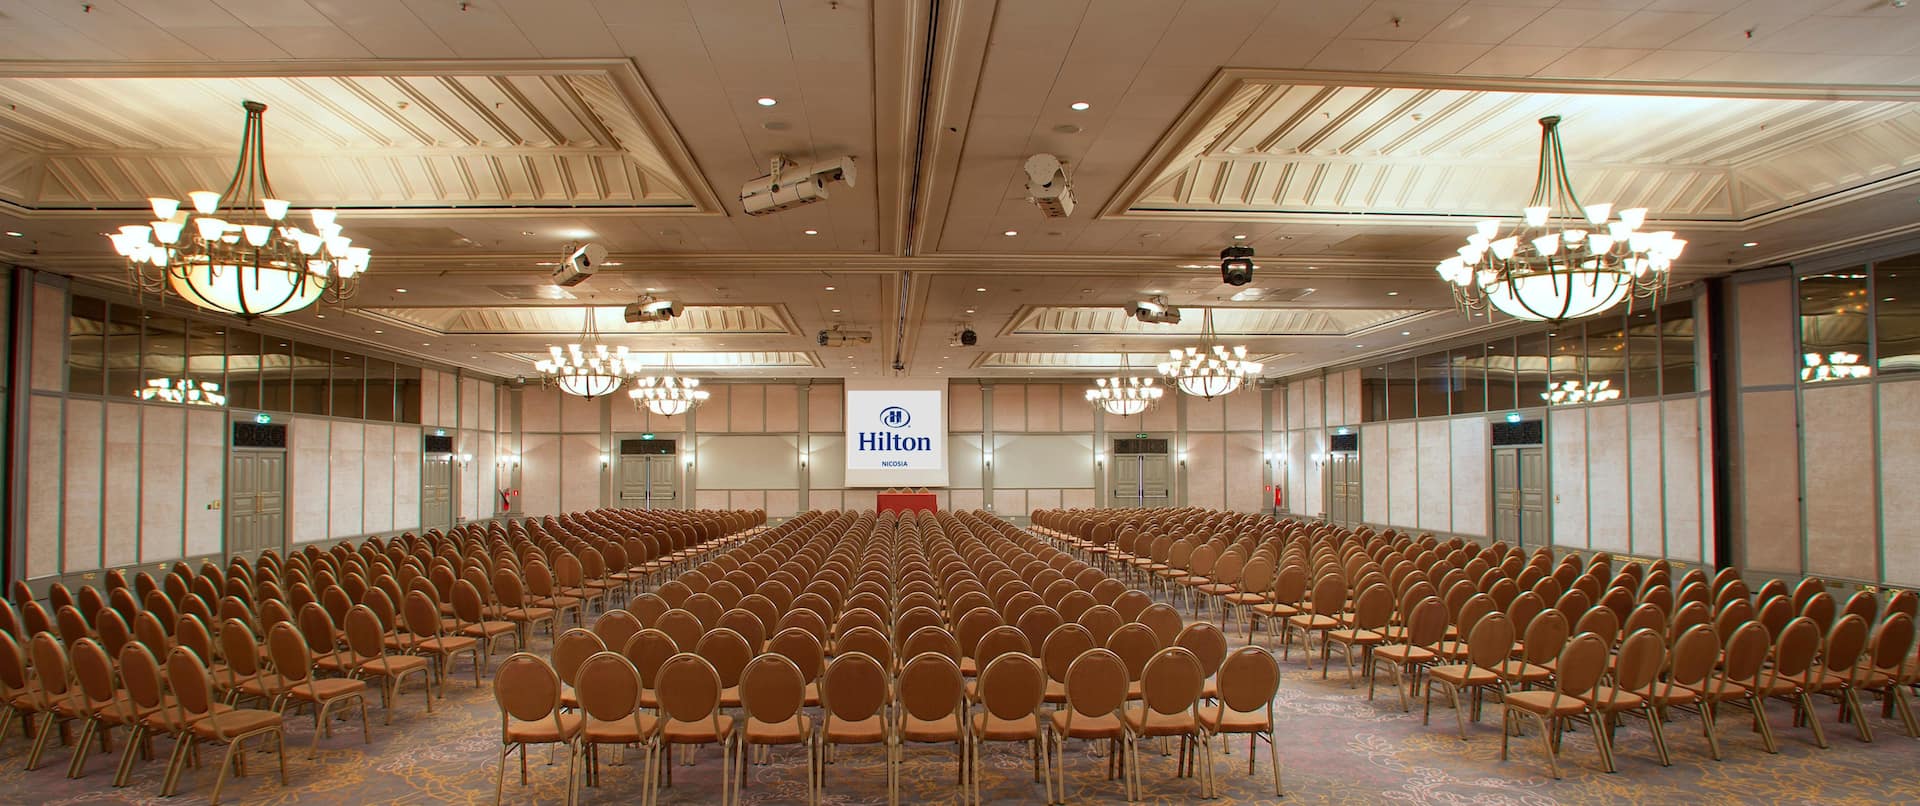 large ballroom with rows of chairs